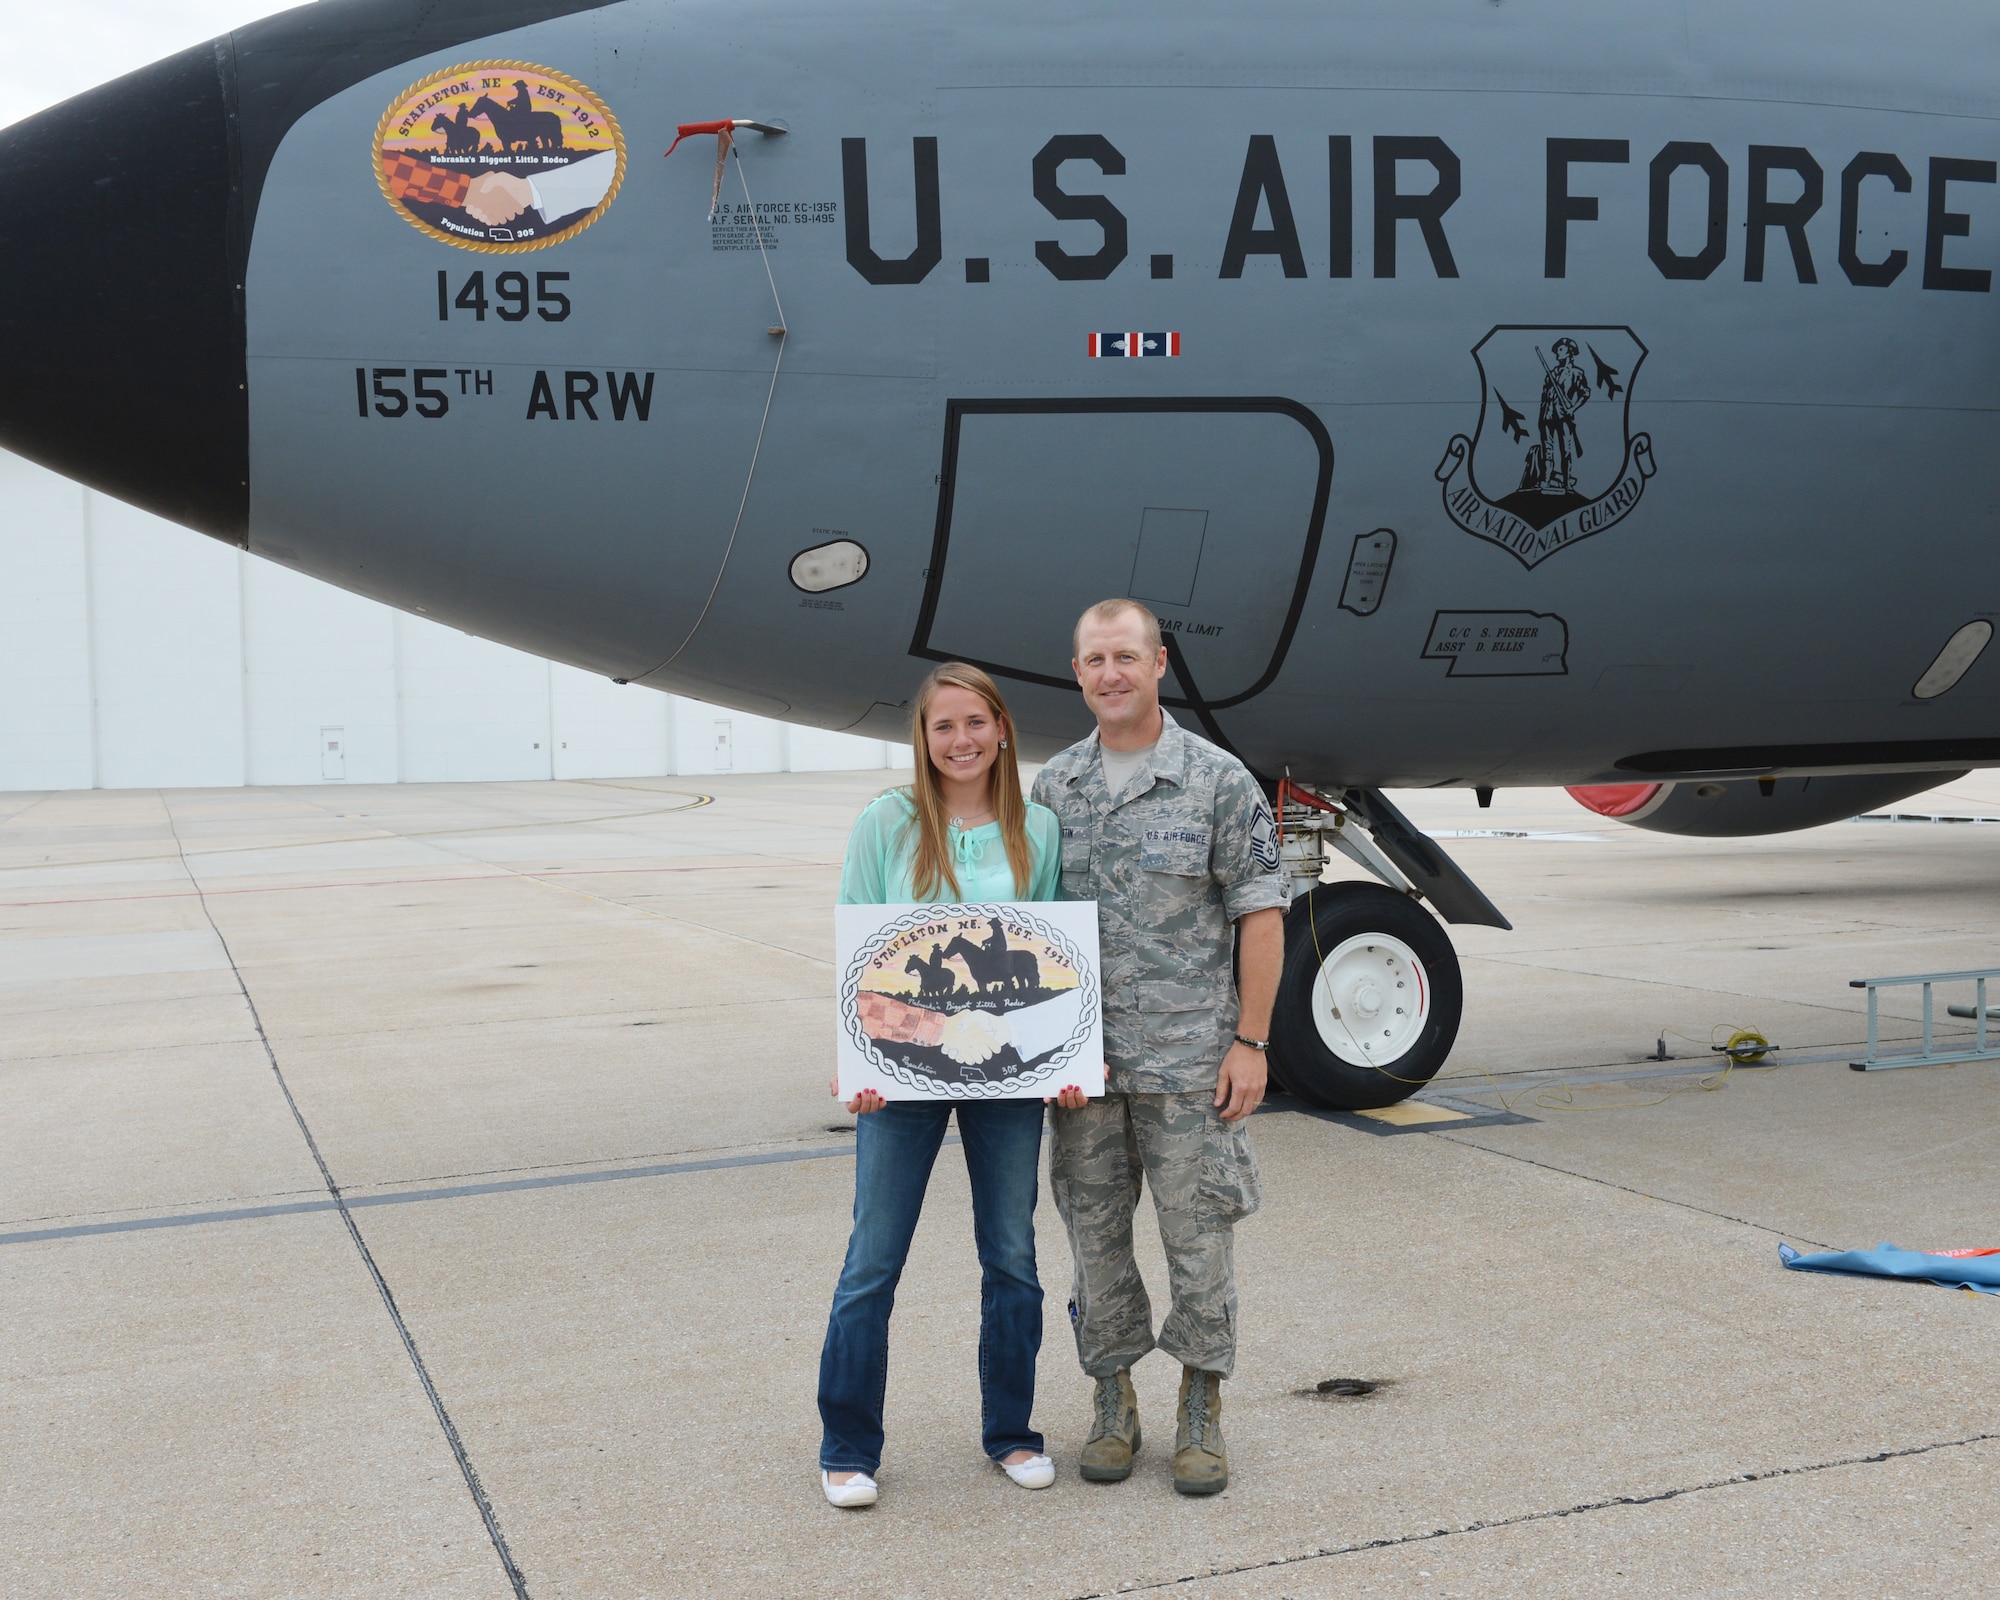 Mariah Harm, a Stapleton, Neb., native and senior at Stapleton High School, holds her original artwork submission with Senior Master Sgt. Chad Martin, the director of the Nebraska Community Nose Art Program, after she unveiled her artwork on the nose of a KC-135R Stratotanker at the 155th Air Refueling Wing, Nebraska Air National Guard Base Aug. 8, in Lincoln, Neb.